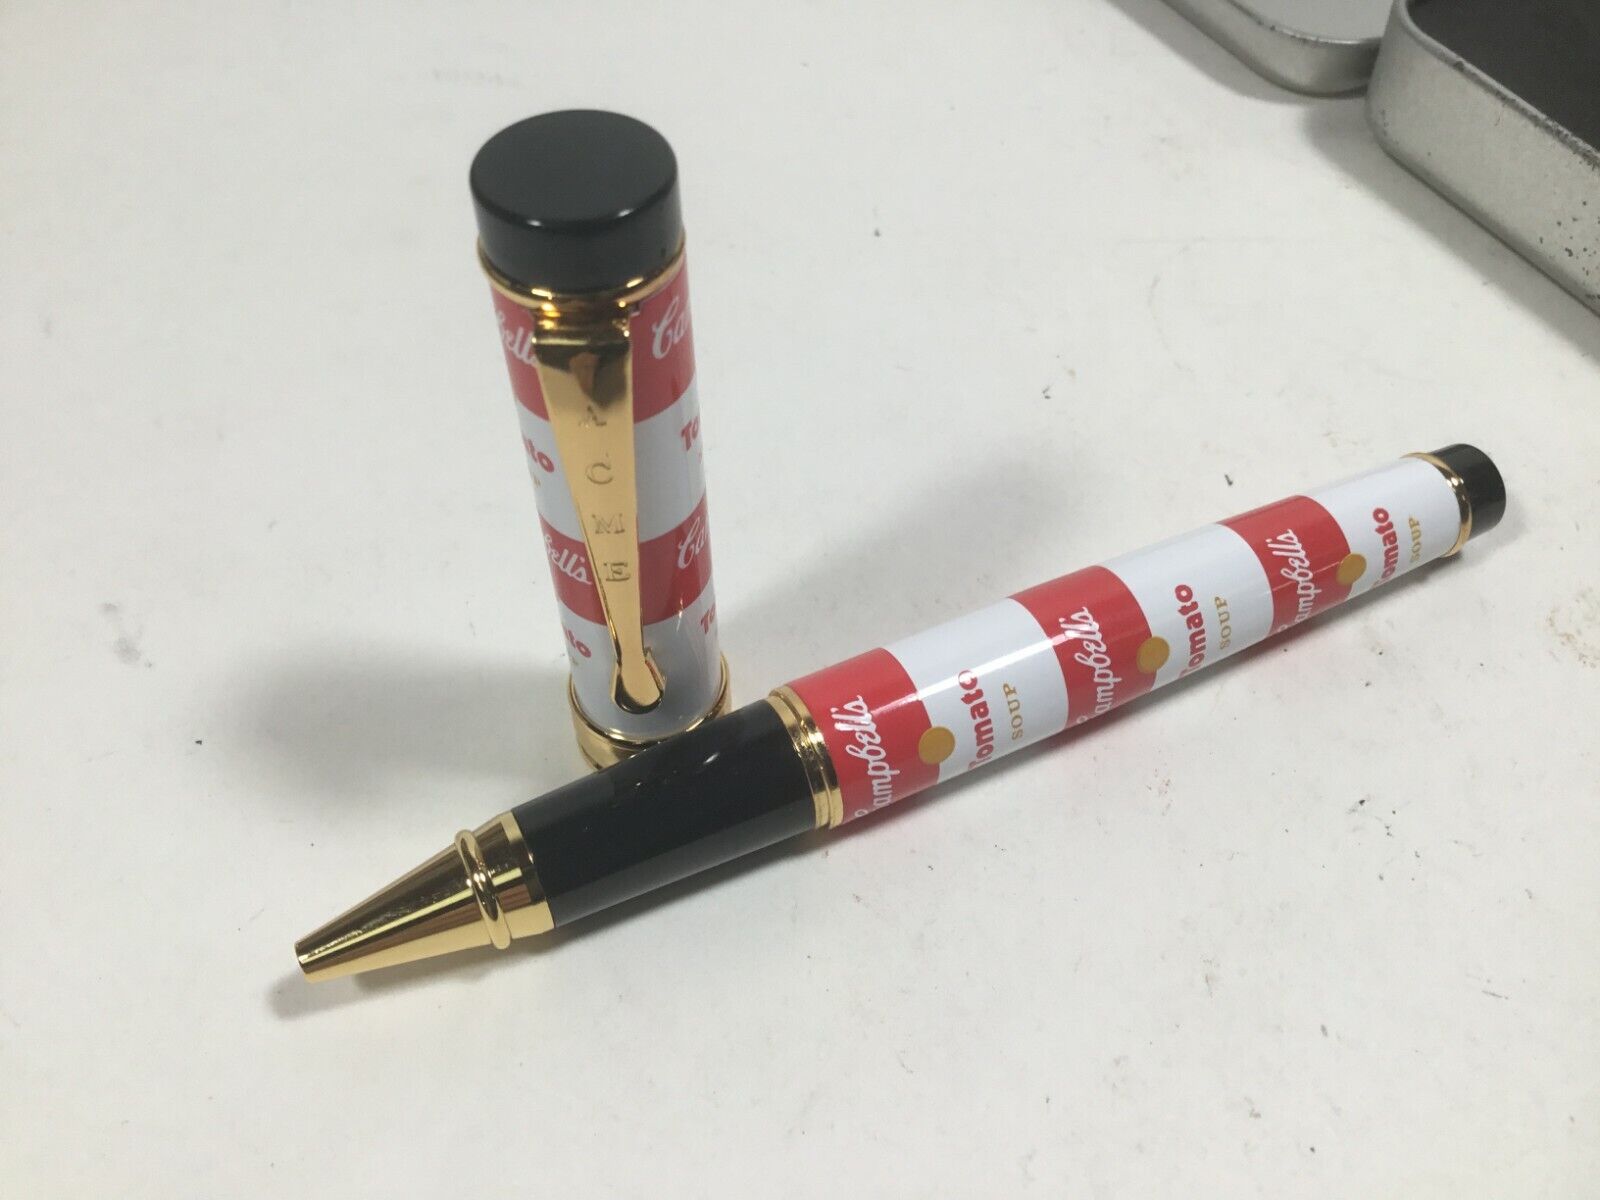 ACME Studio ANDY WARHOL “Campbell’s Gold” Roller Ball Pen NEW